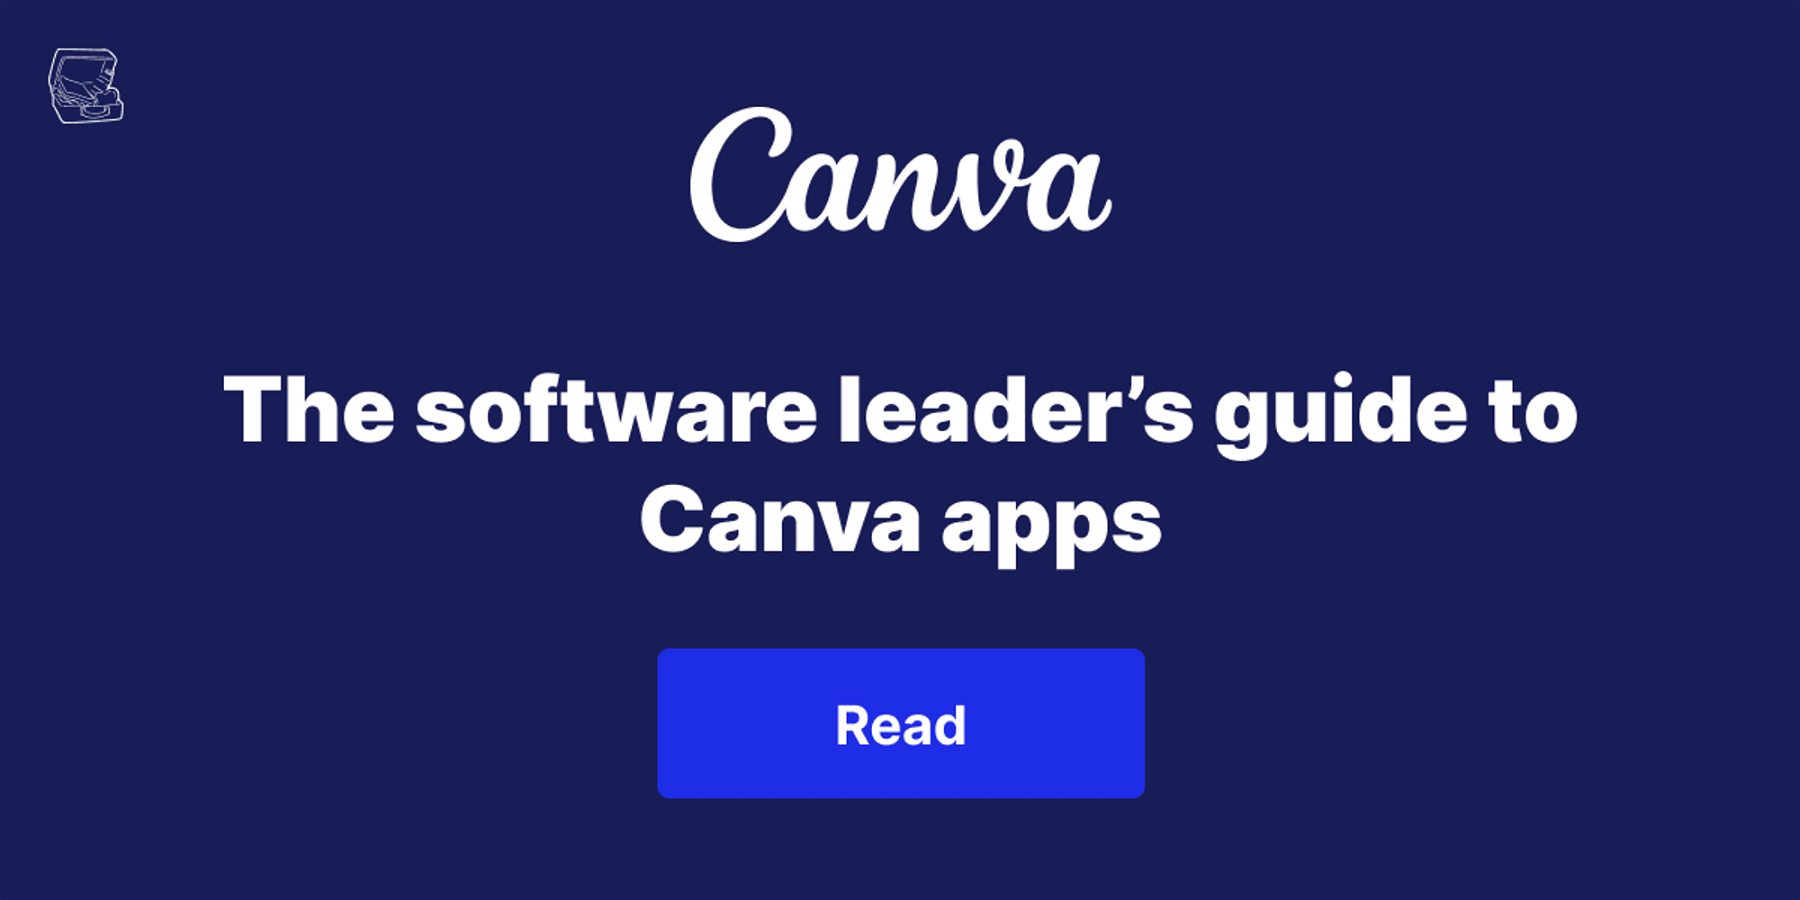 The software leader’s guide to Canva apps